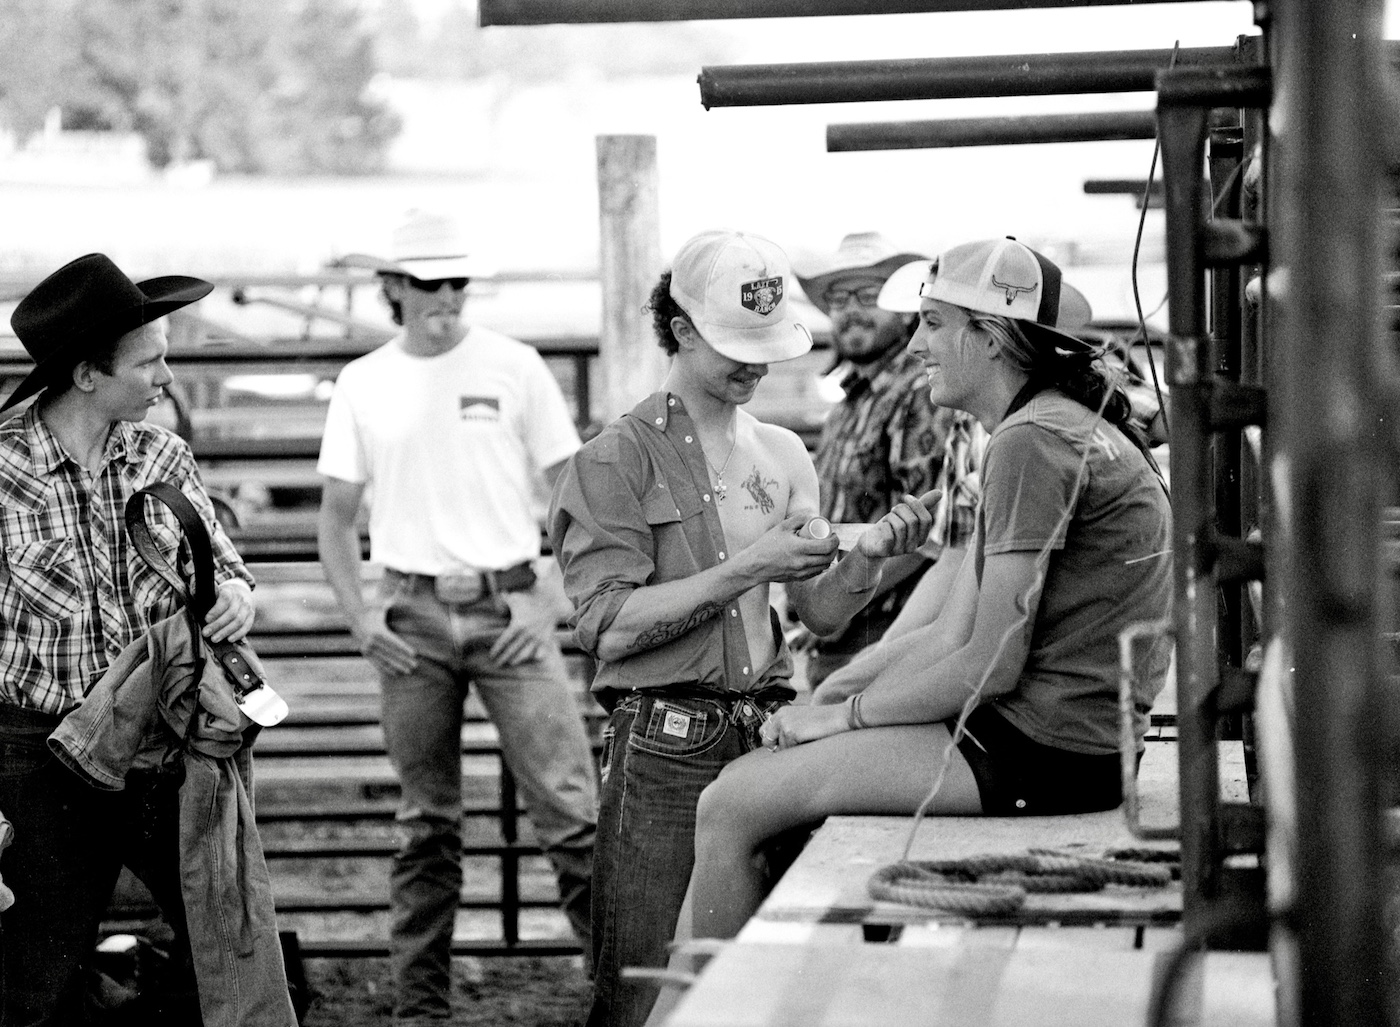 Medium 120 Format Kodak Professional T-Max 400 Film Western photography sample from the Double R Ranch rodeo school in Mildmay, Ontario, Canada.